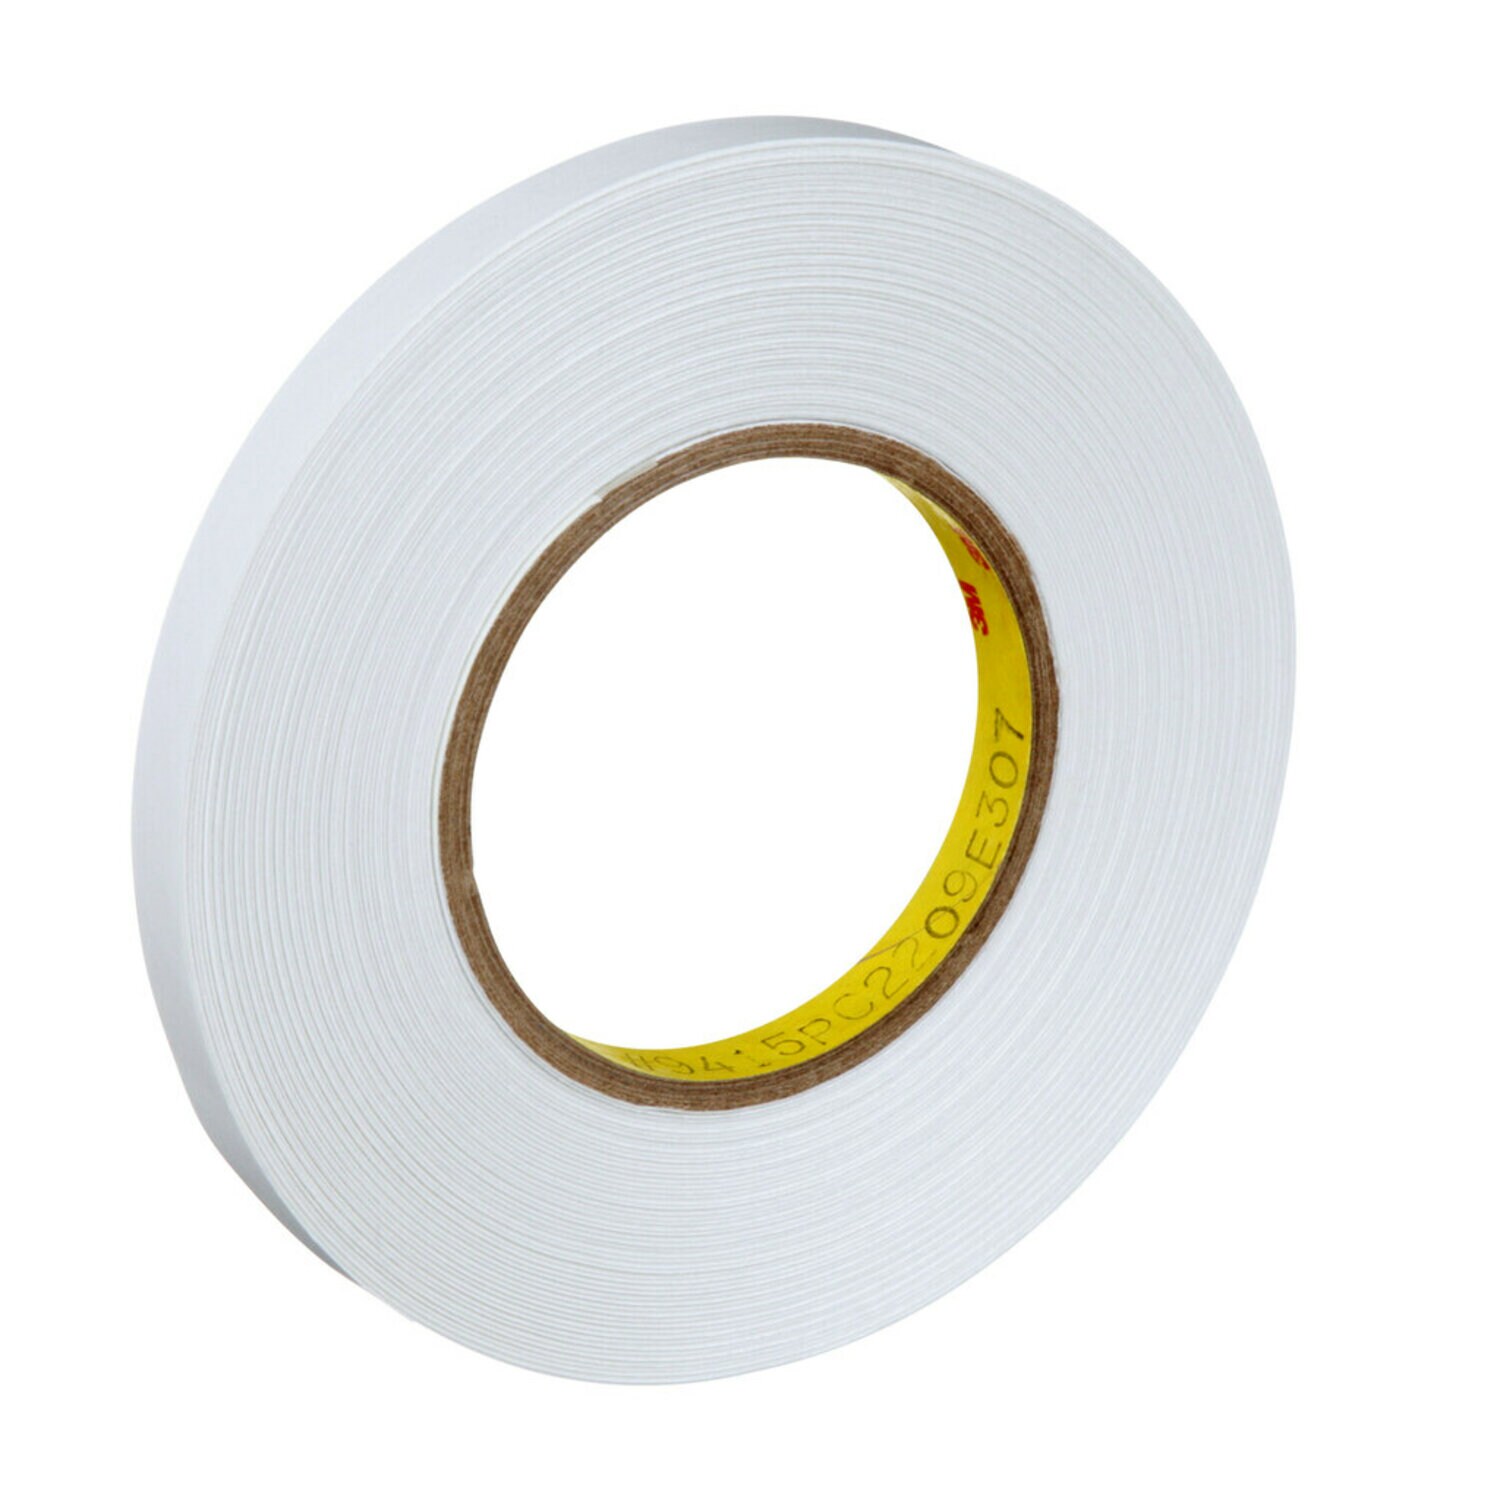 7000048708 - 3M Removable Repositionable Tape 9415PC, Clear, 1/2 in x 72 yd, 2 mil,
72 Rolls/Case